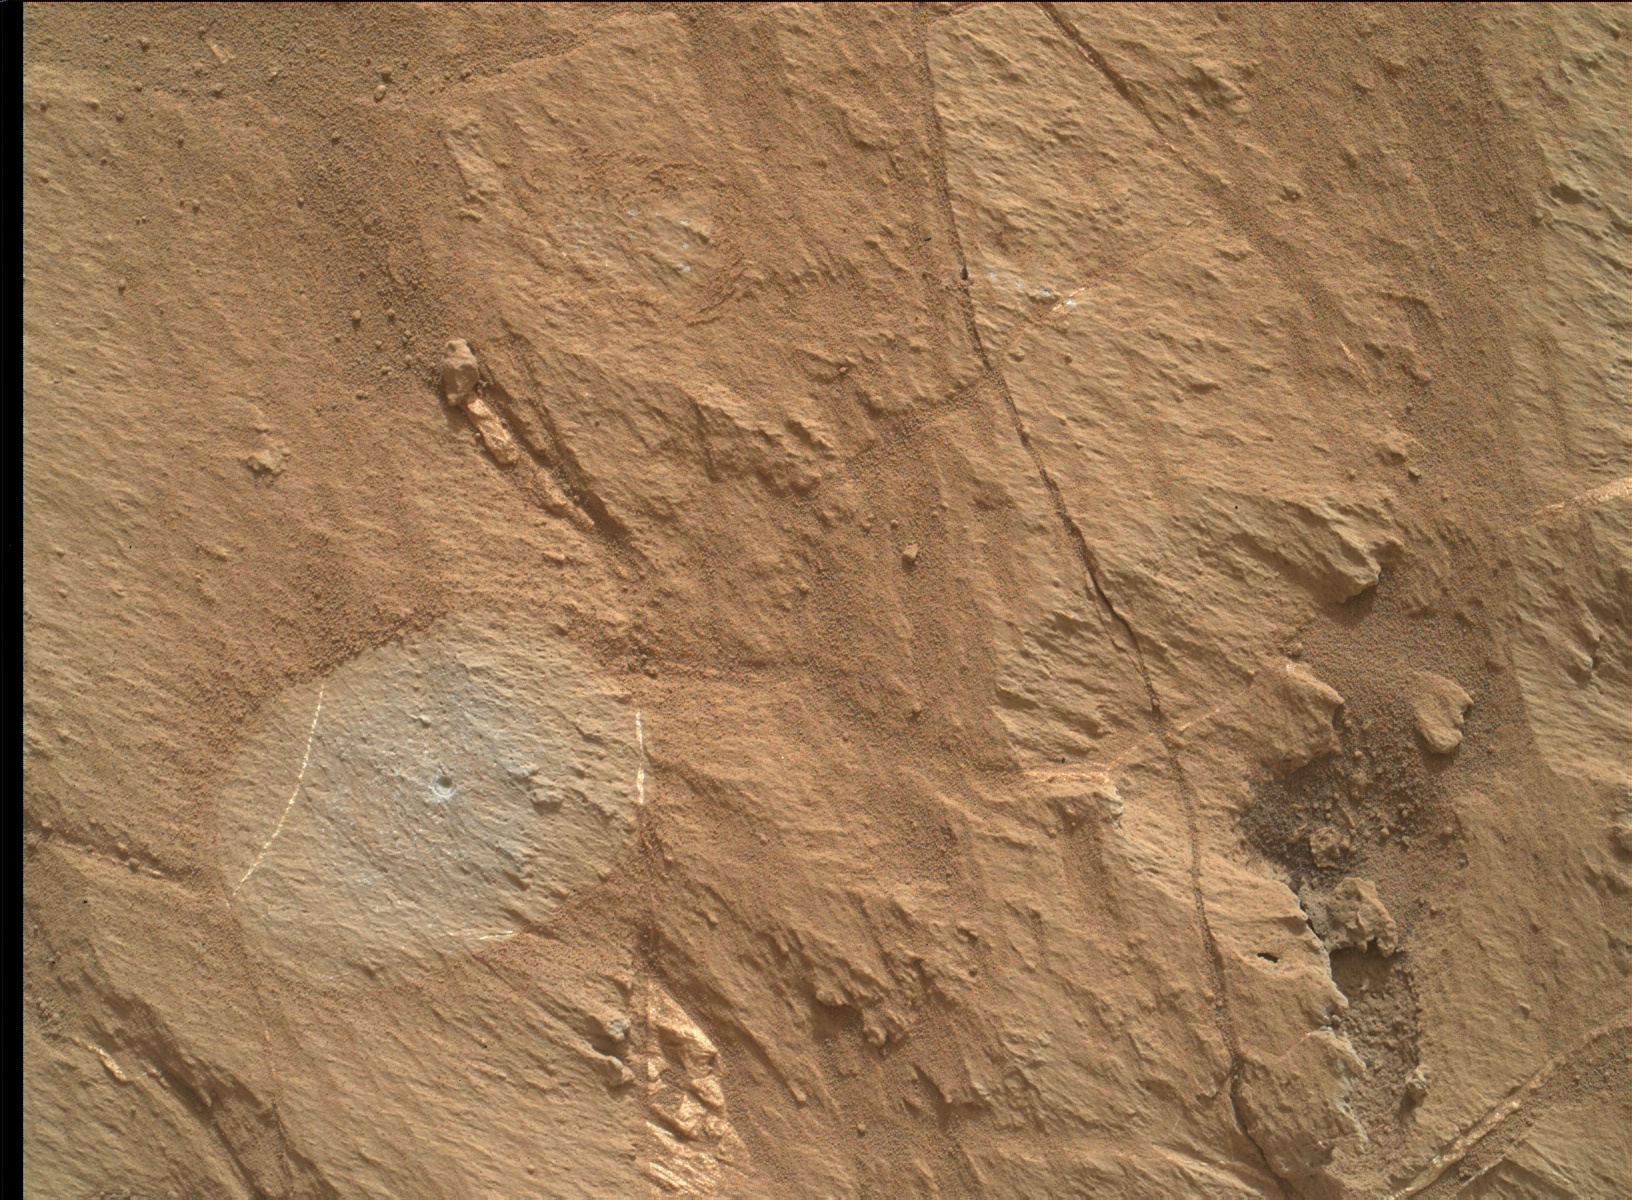 Nasa's Mars rover Curiosity acquired this image using its Mars Hand Lens Imager (MAHLI) on Sol 1057